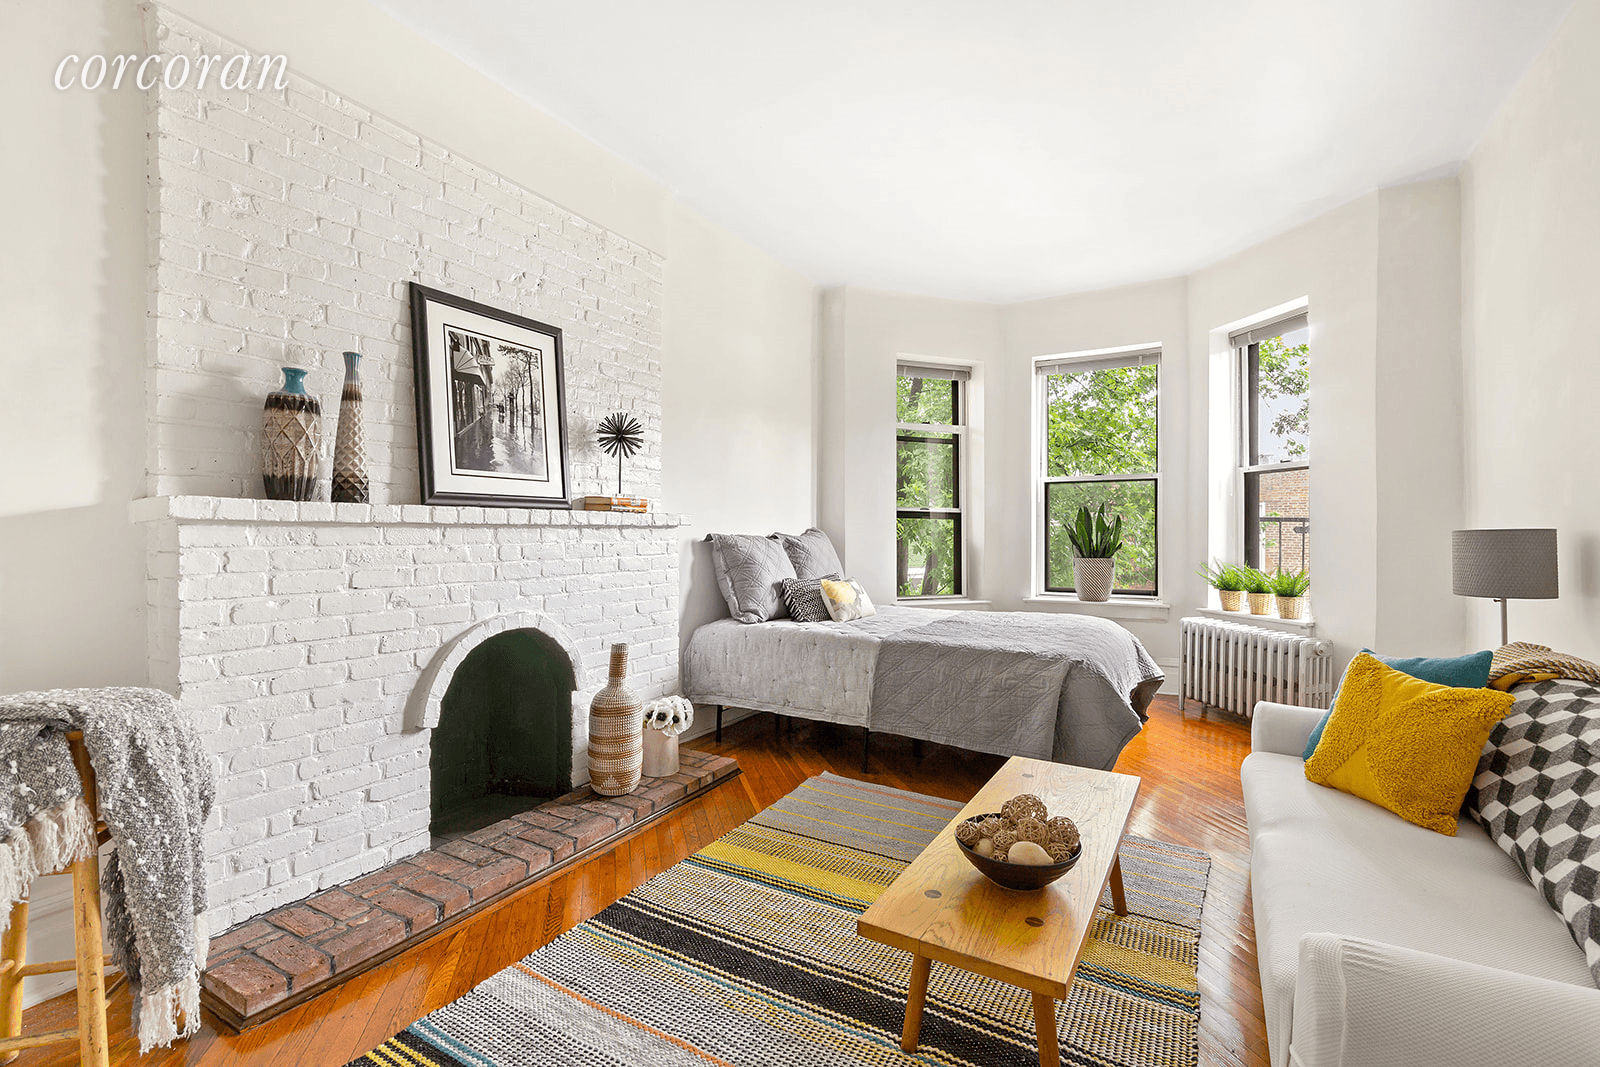 Situated on one of the prettiest tree lined streets in Brooklyn lies this enchanted studio apartment.